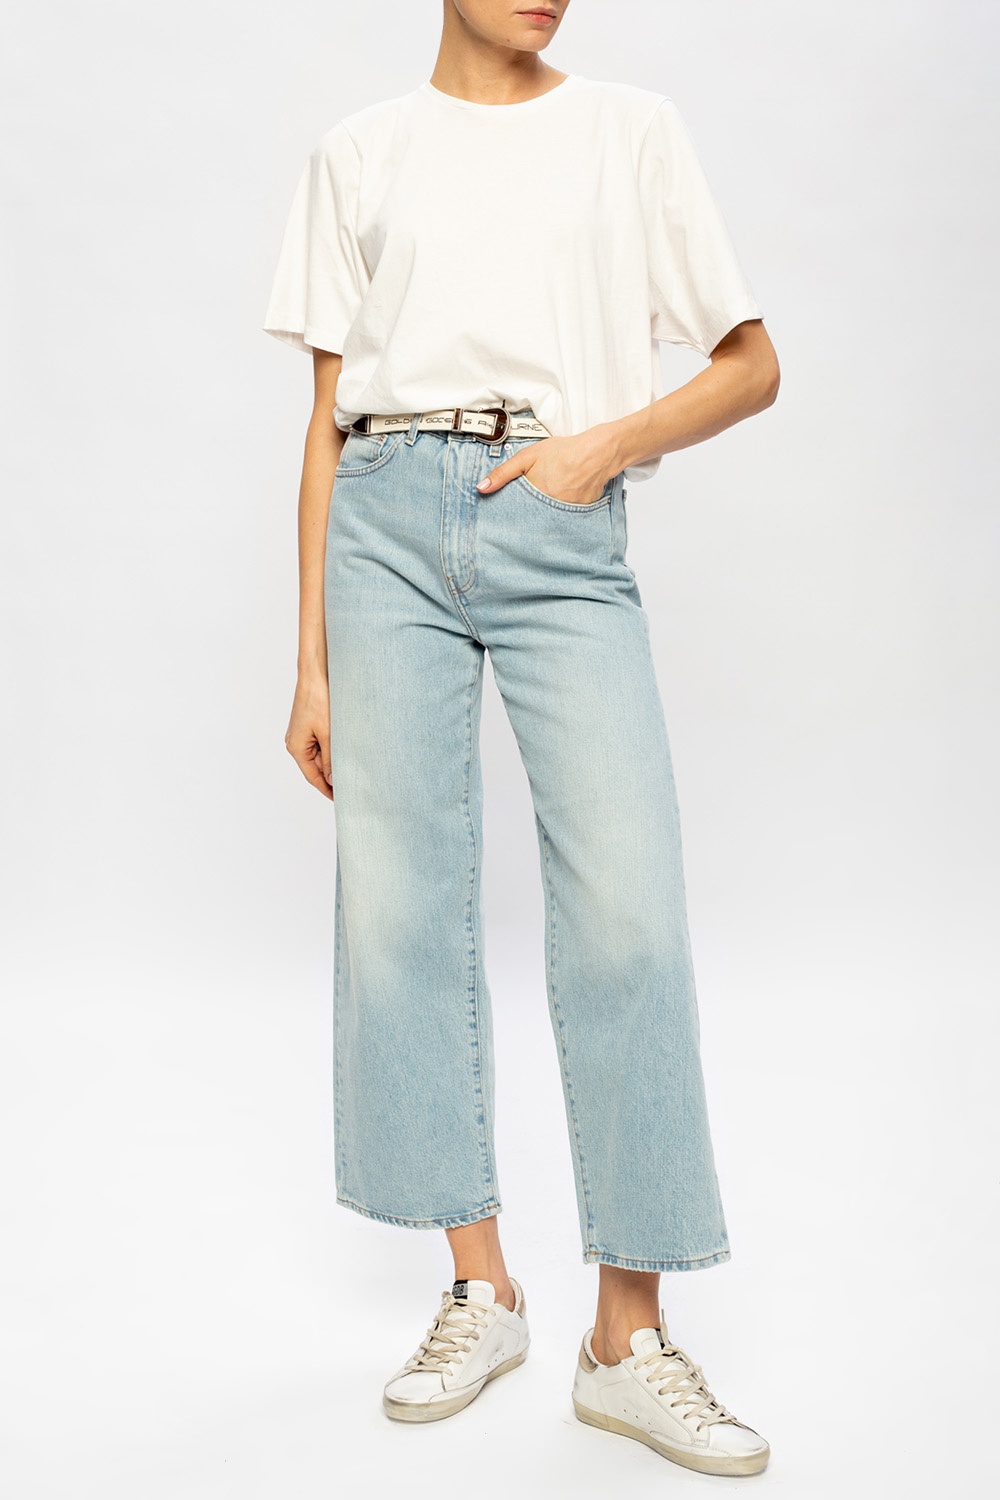 Toteme ‘Flair’ jeans with